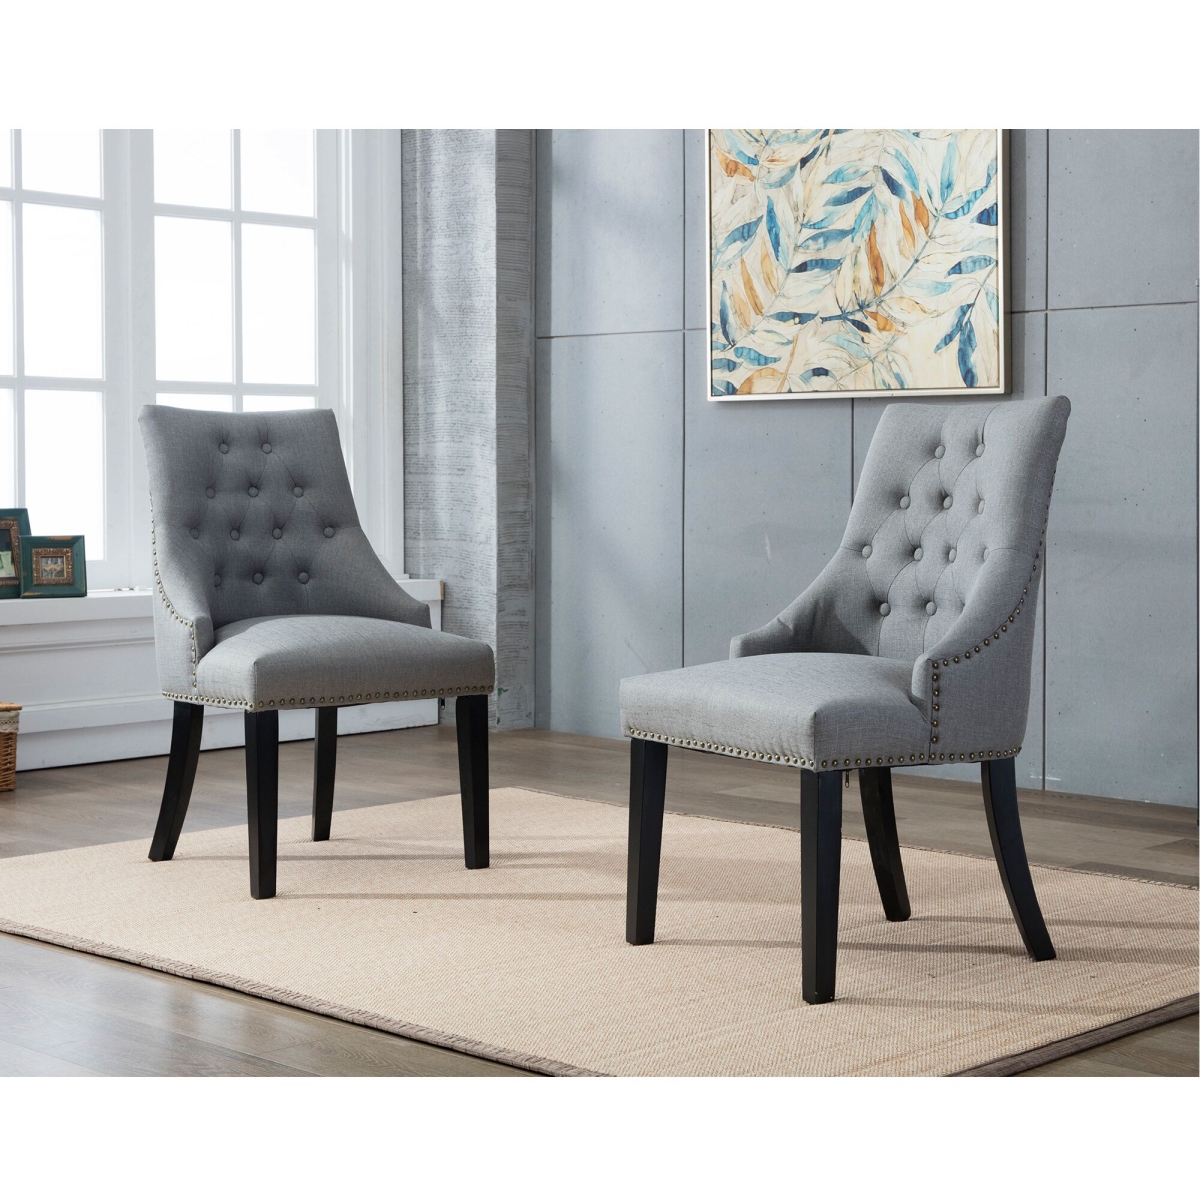 Lss-8229c02-gray Mid Back Button-tufted Fabric Dining Chair With Low-profile Armrest, Gray - Set Of 2